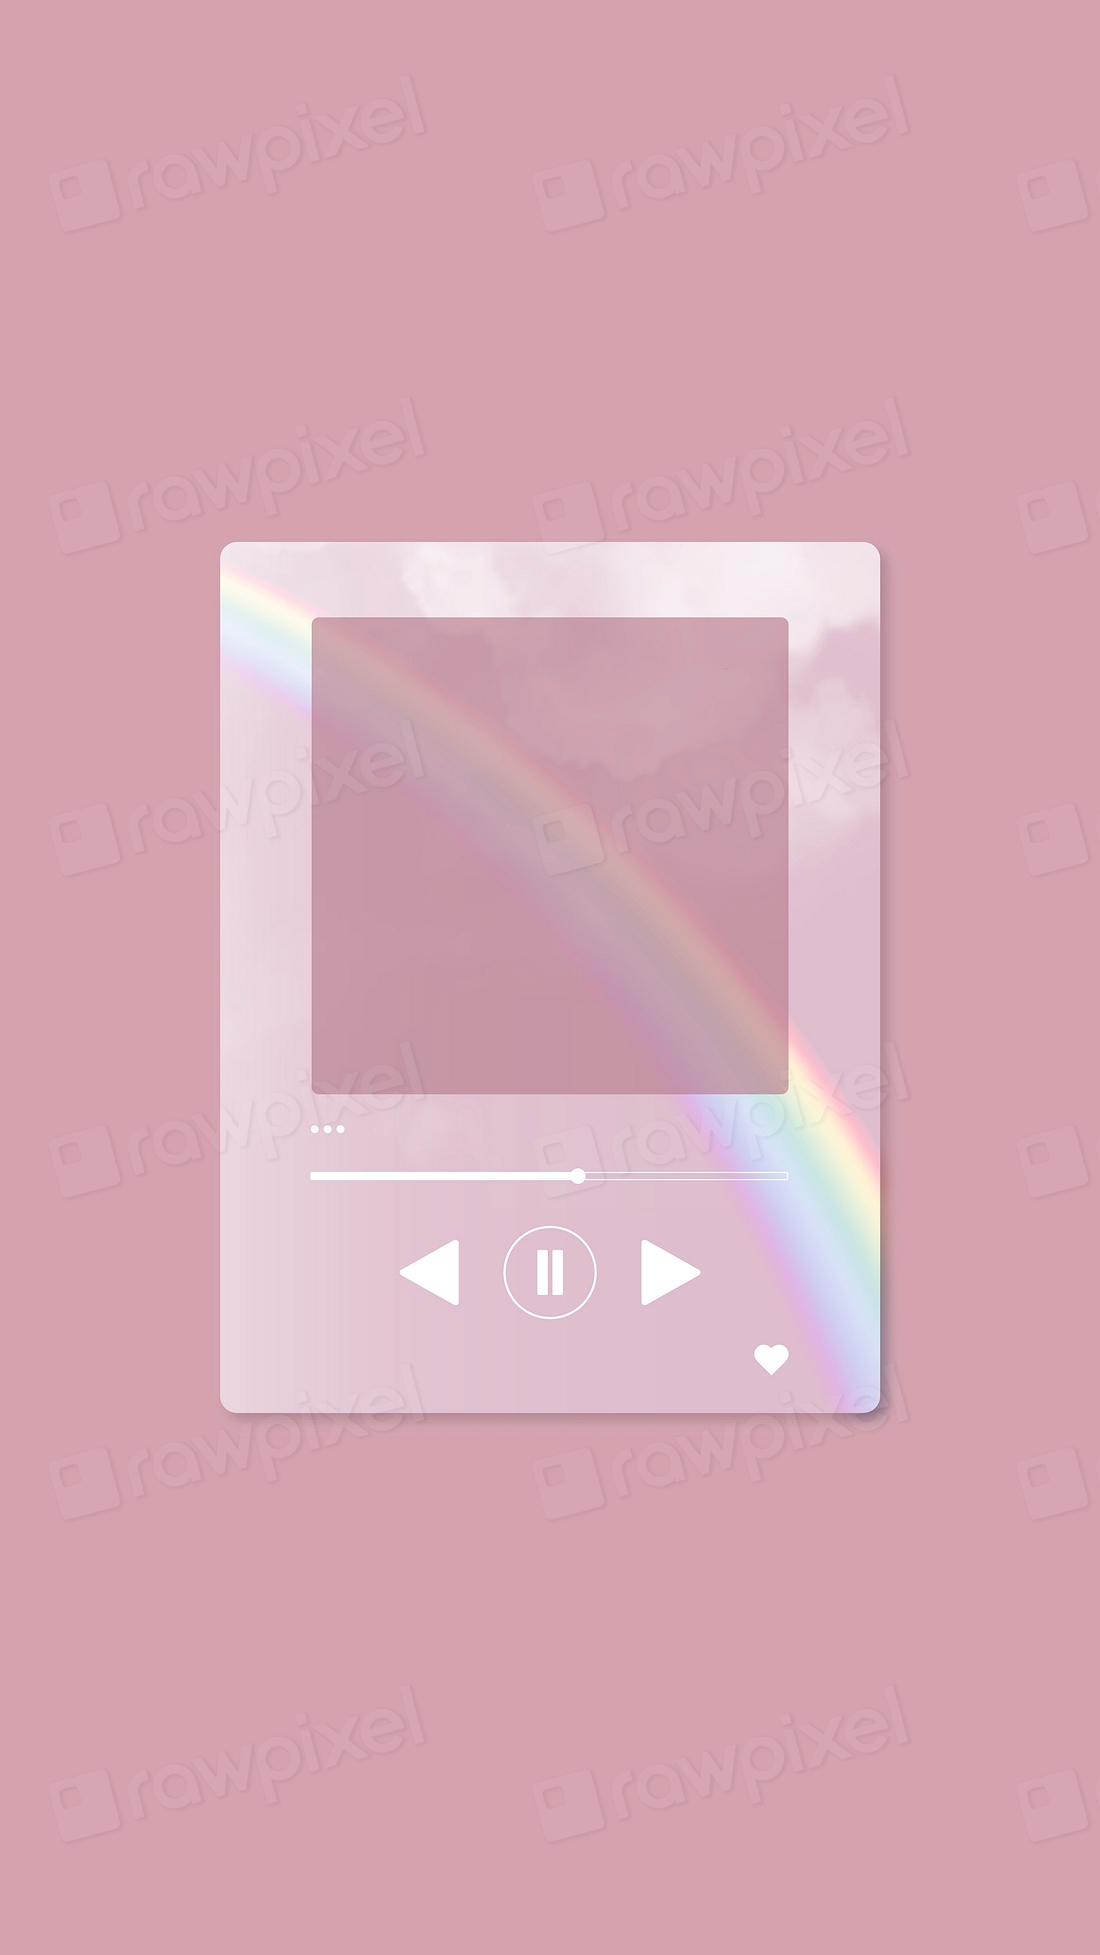 Pink aesthetic music player Instagram | Free Photo - rawpixel